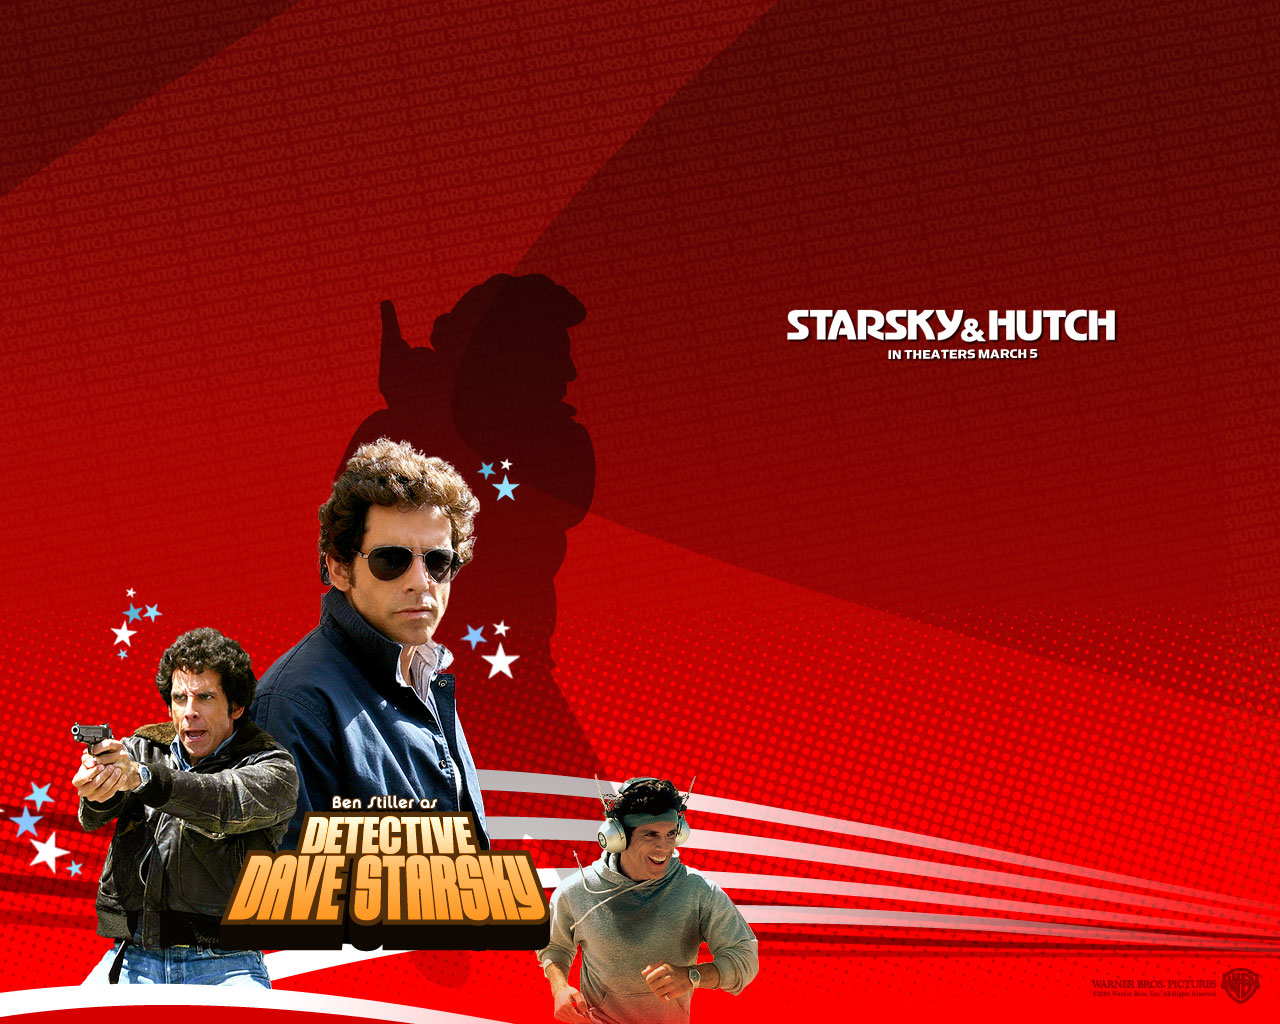 Download High quality Starsky And Hutch wallpaper / Movies / 1280x1024